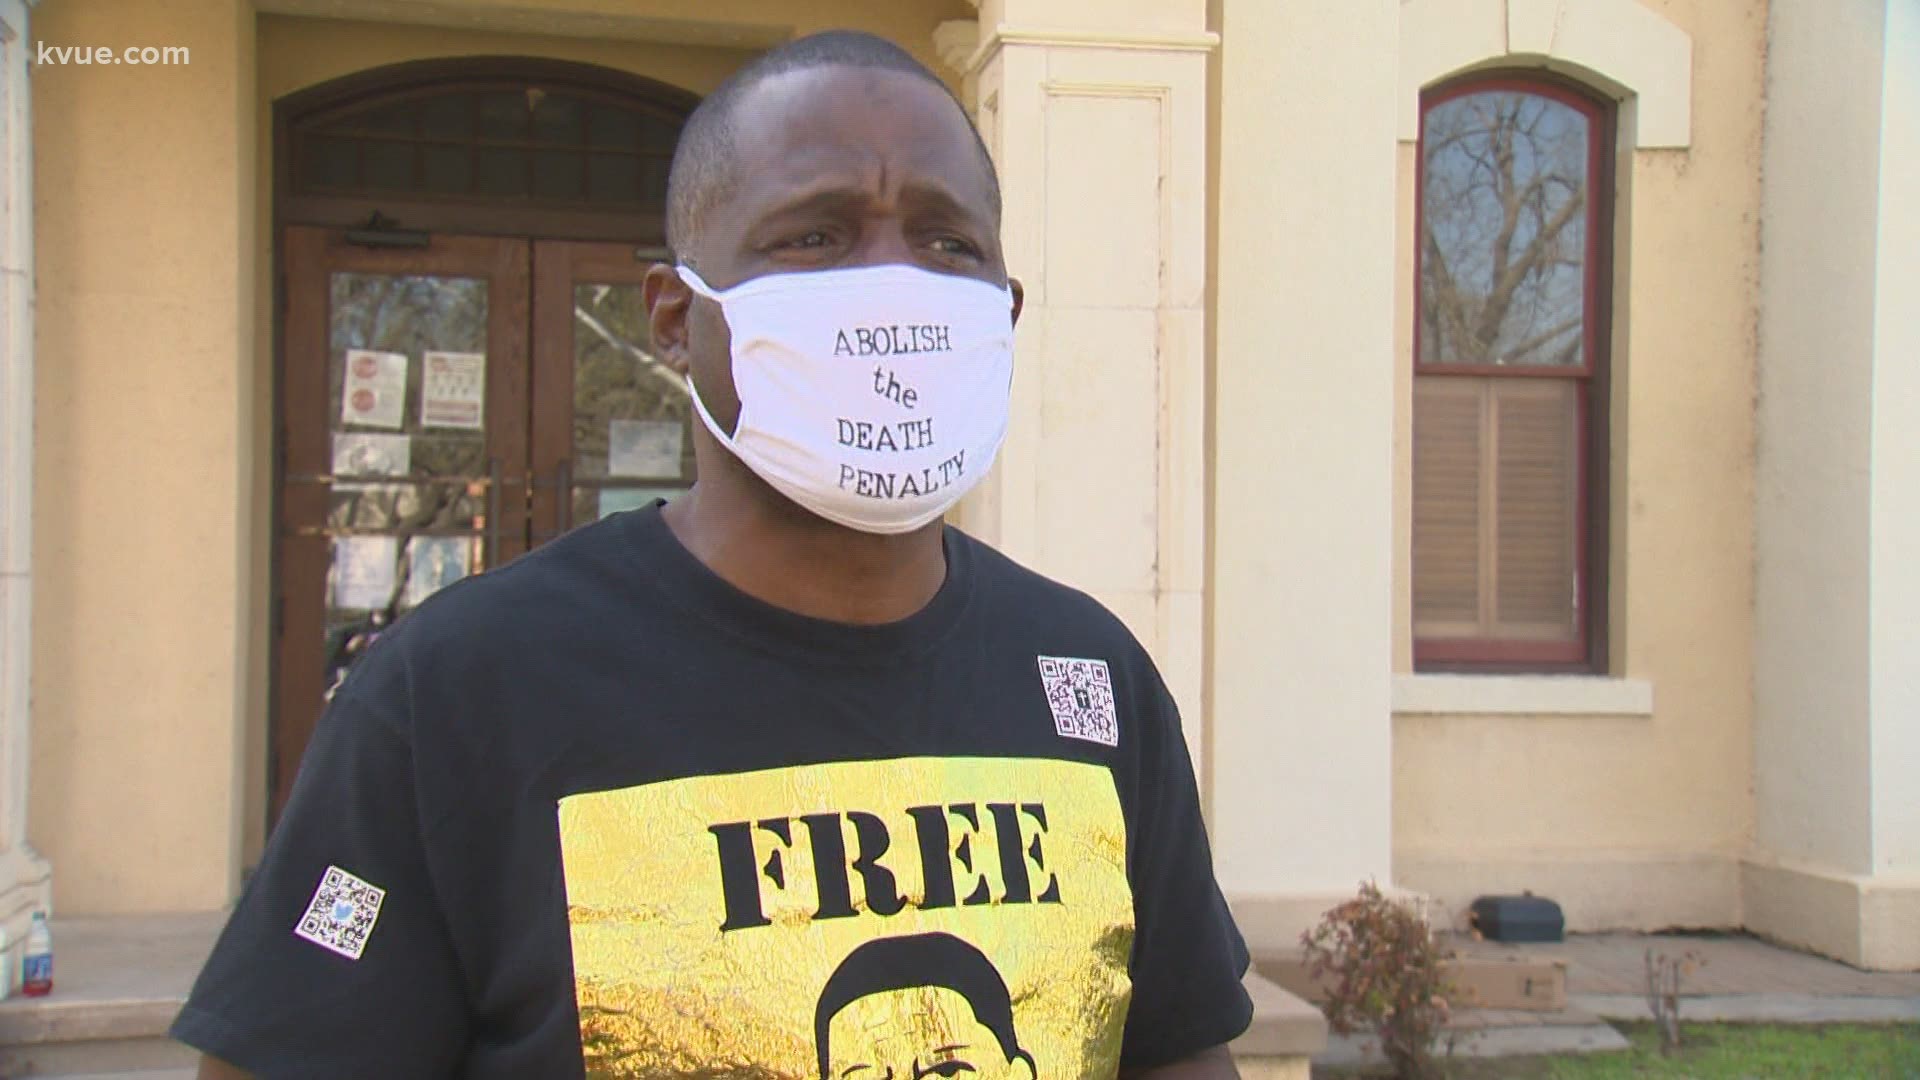 Rodney Reed supporters held a rally on Saturday at the Bastrop County courthouse.